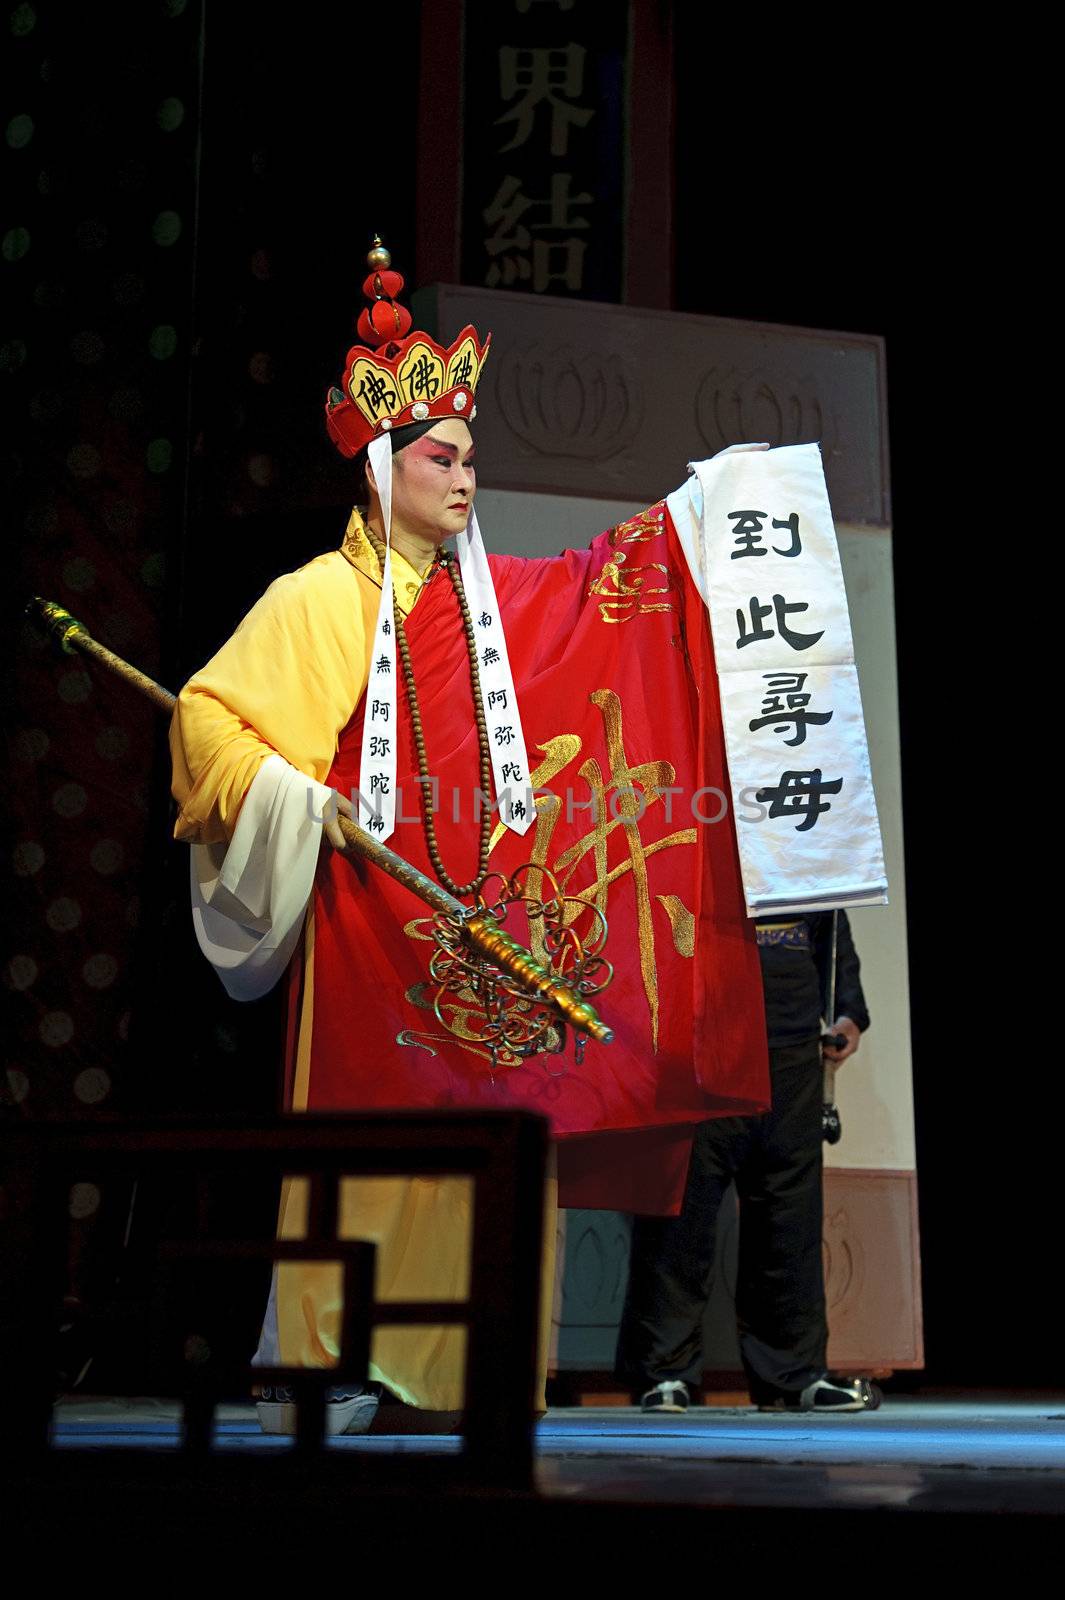 CHENGDU - JUN 6: Mulian Drama of Chinese Qi opera performer make a show on stage to compete for awards in 25th Chinese Drama Plum Blossom Award competition at Experimental theater.Jun 6, 2011 in Chengdu, China.